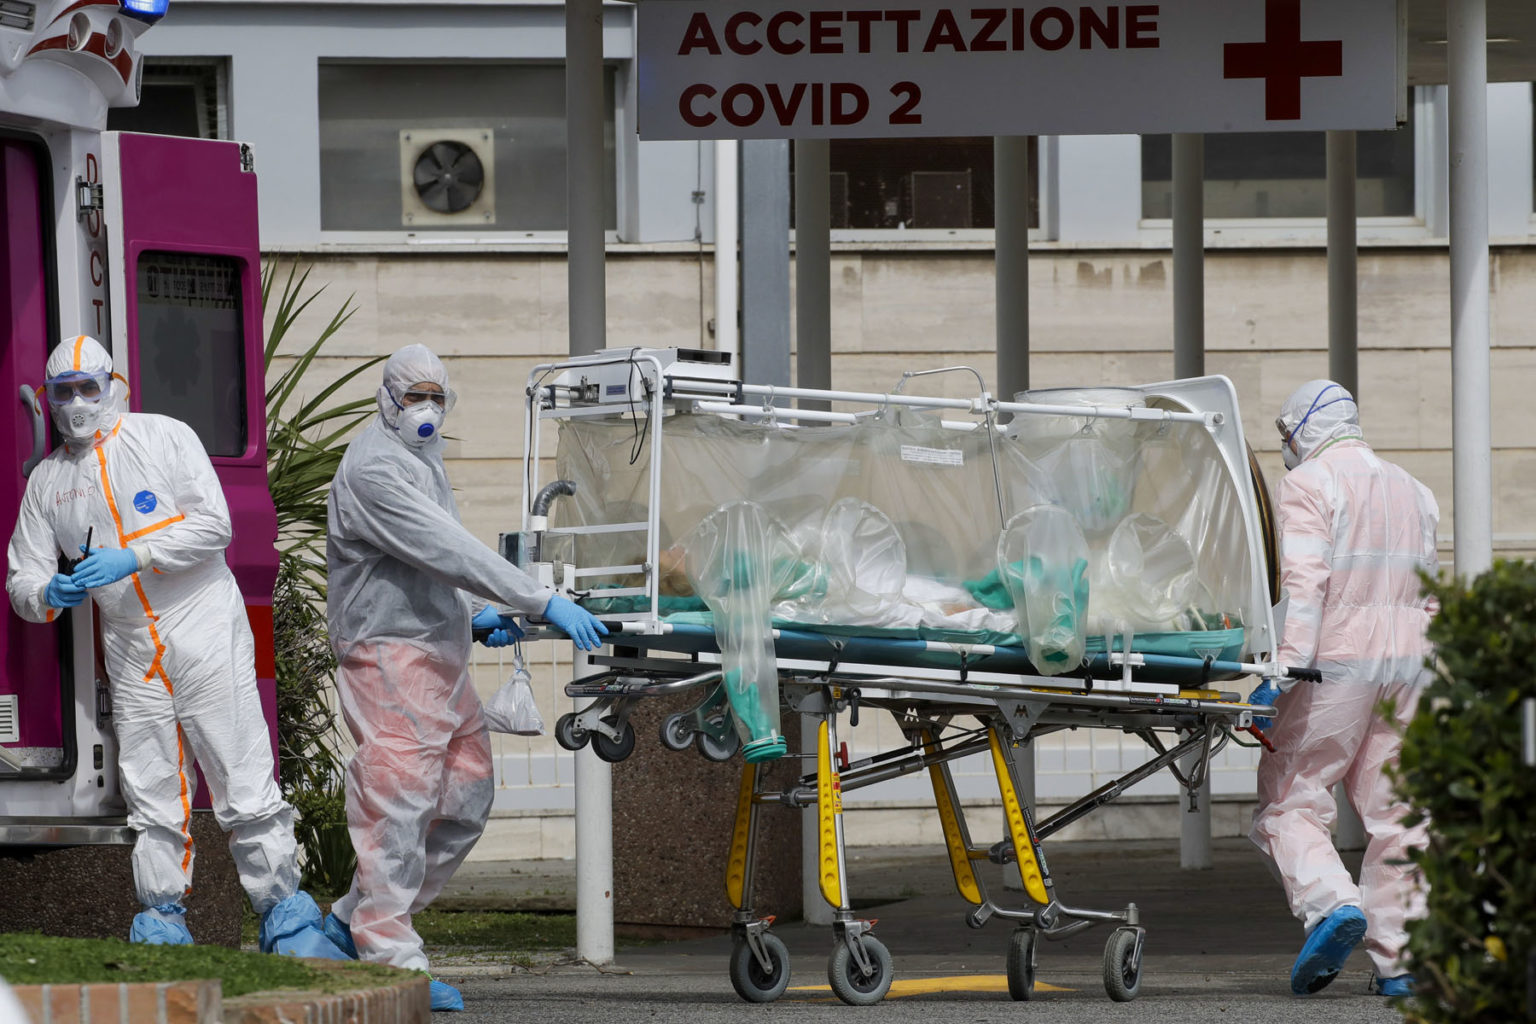 Italy’s coronavirus toll tops 10,000 as 889 fresh deaths reported